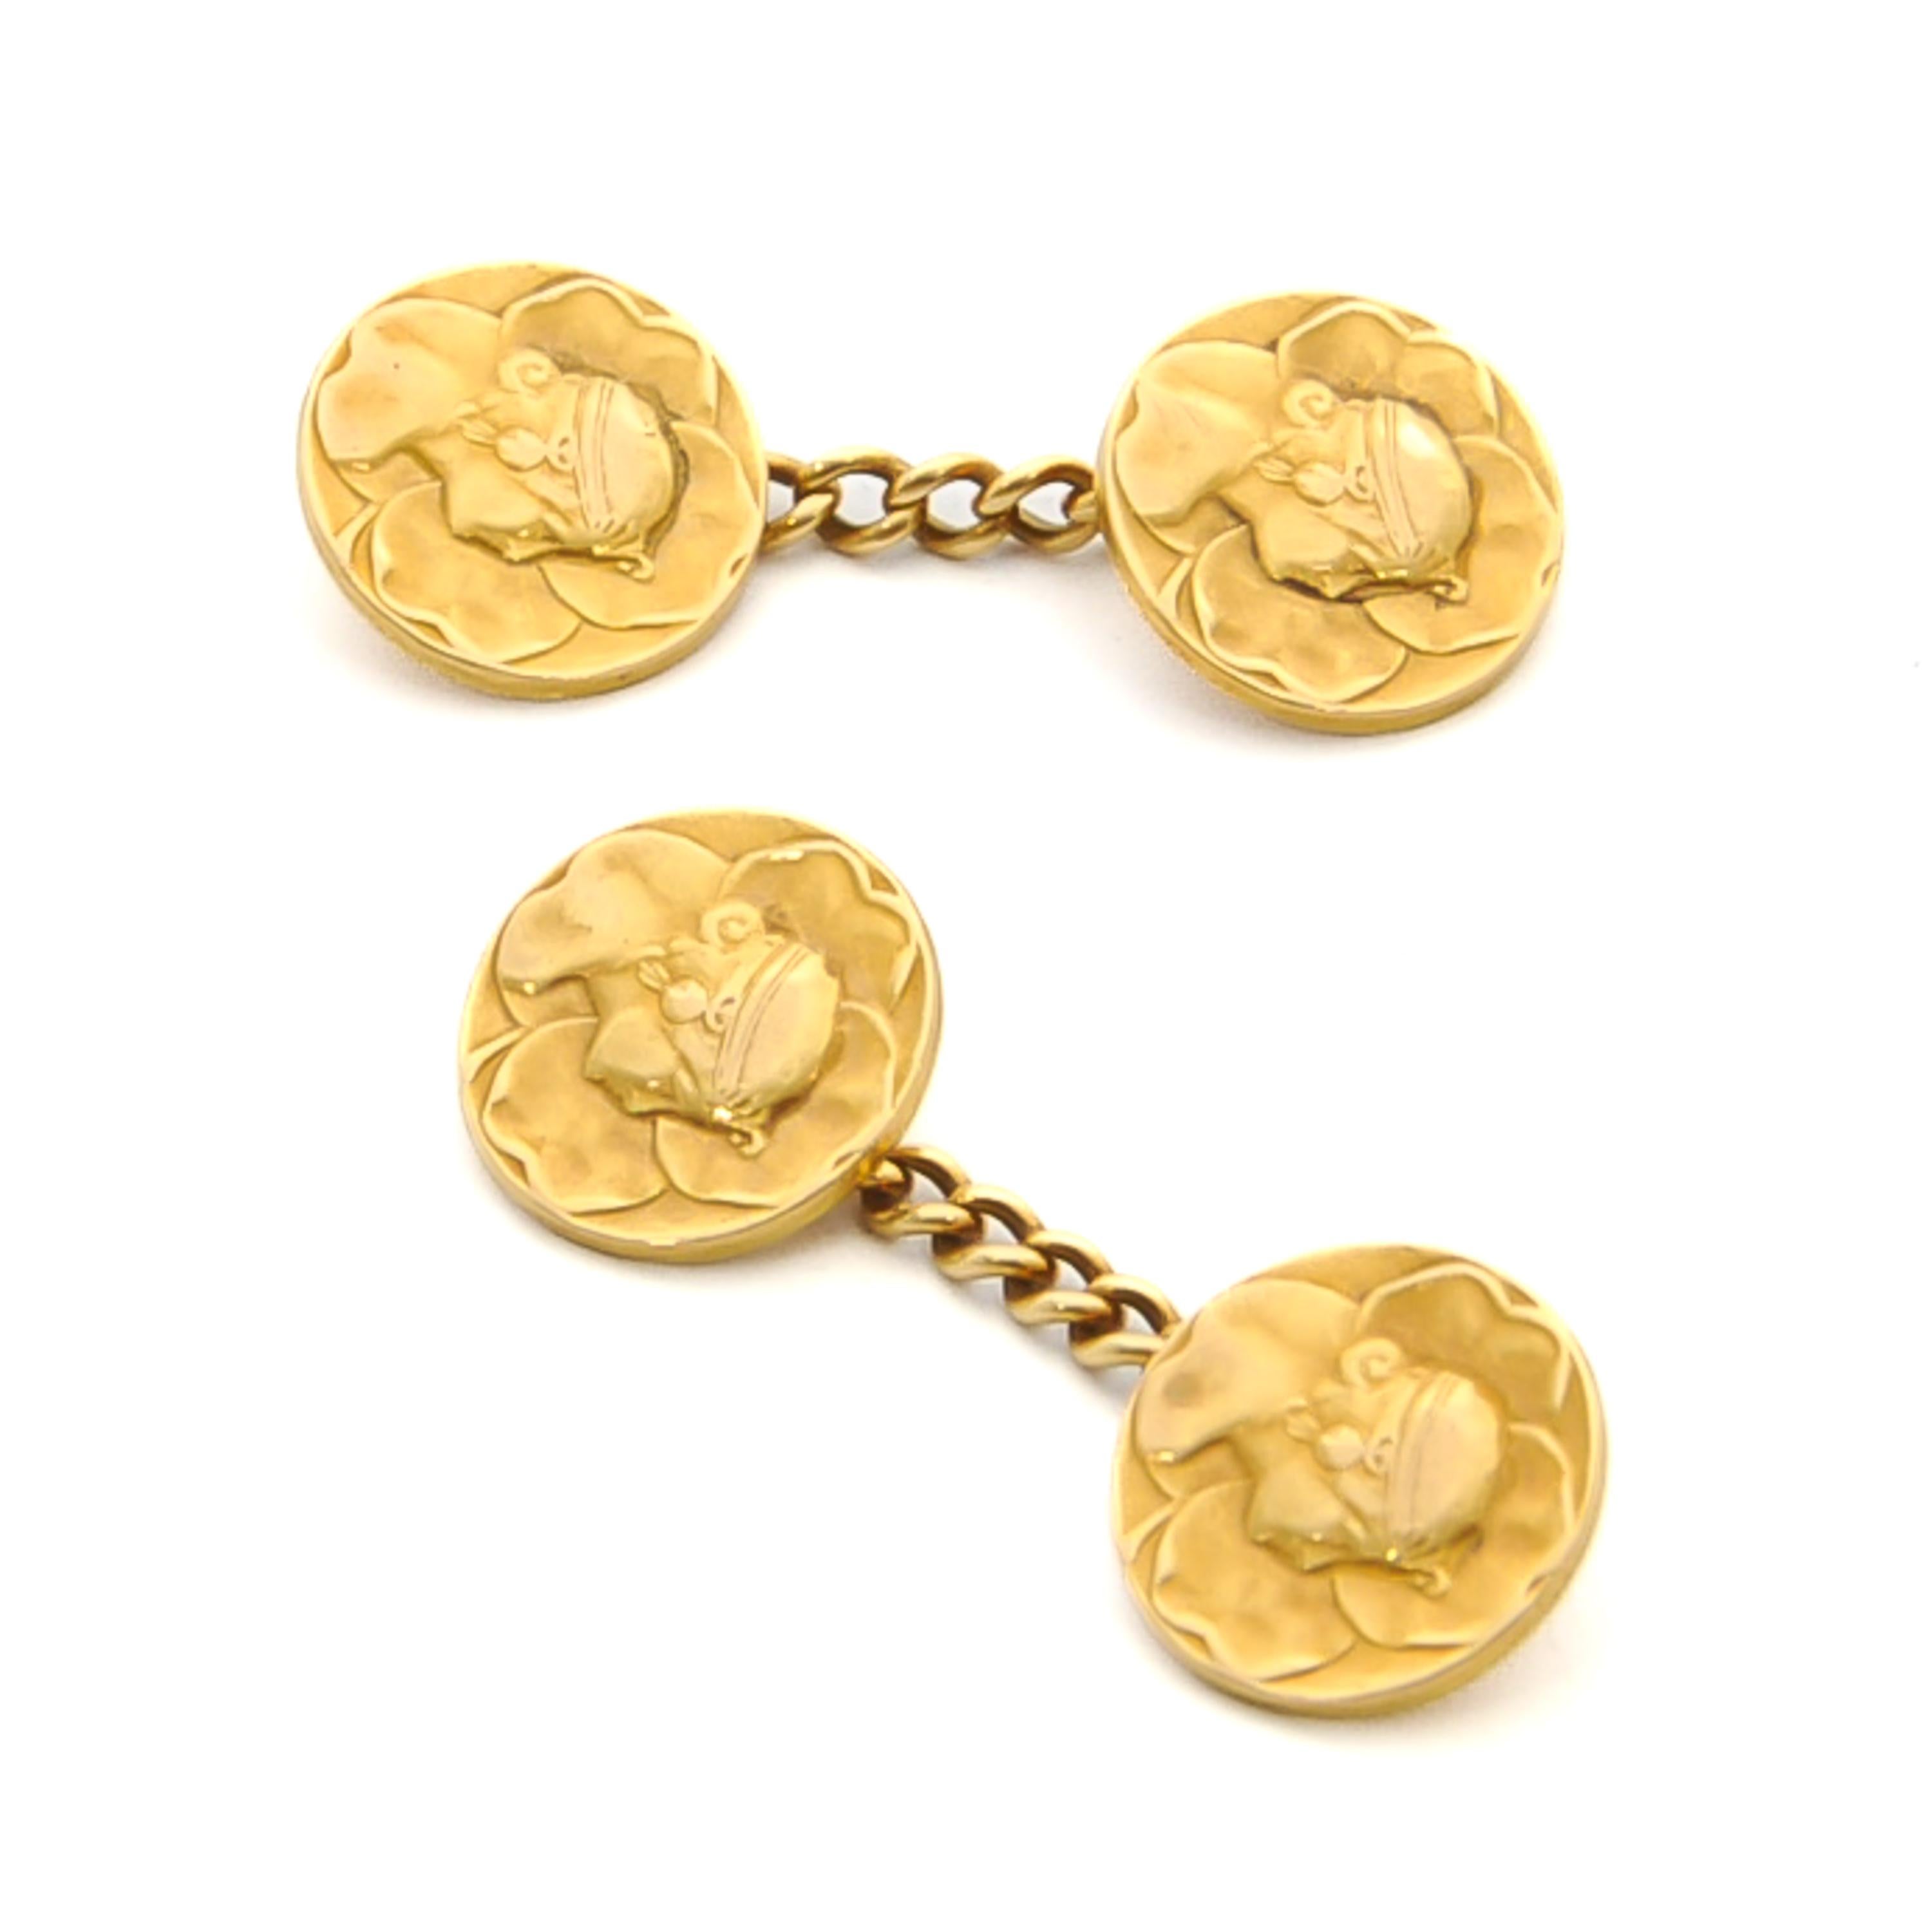 A winsome woman's profile graces these elegant antique Art Nouveau chain-link cufflinks. Beautifully crafted in 18 karat gold with a carved relief of a woman's profile. This lovely lady wears a graceful headband in her hair, accessories and her hair